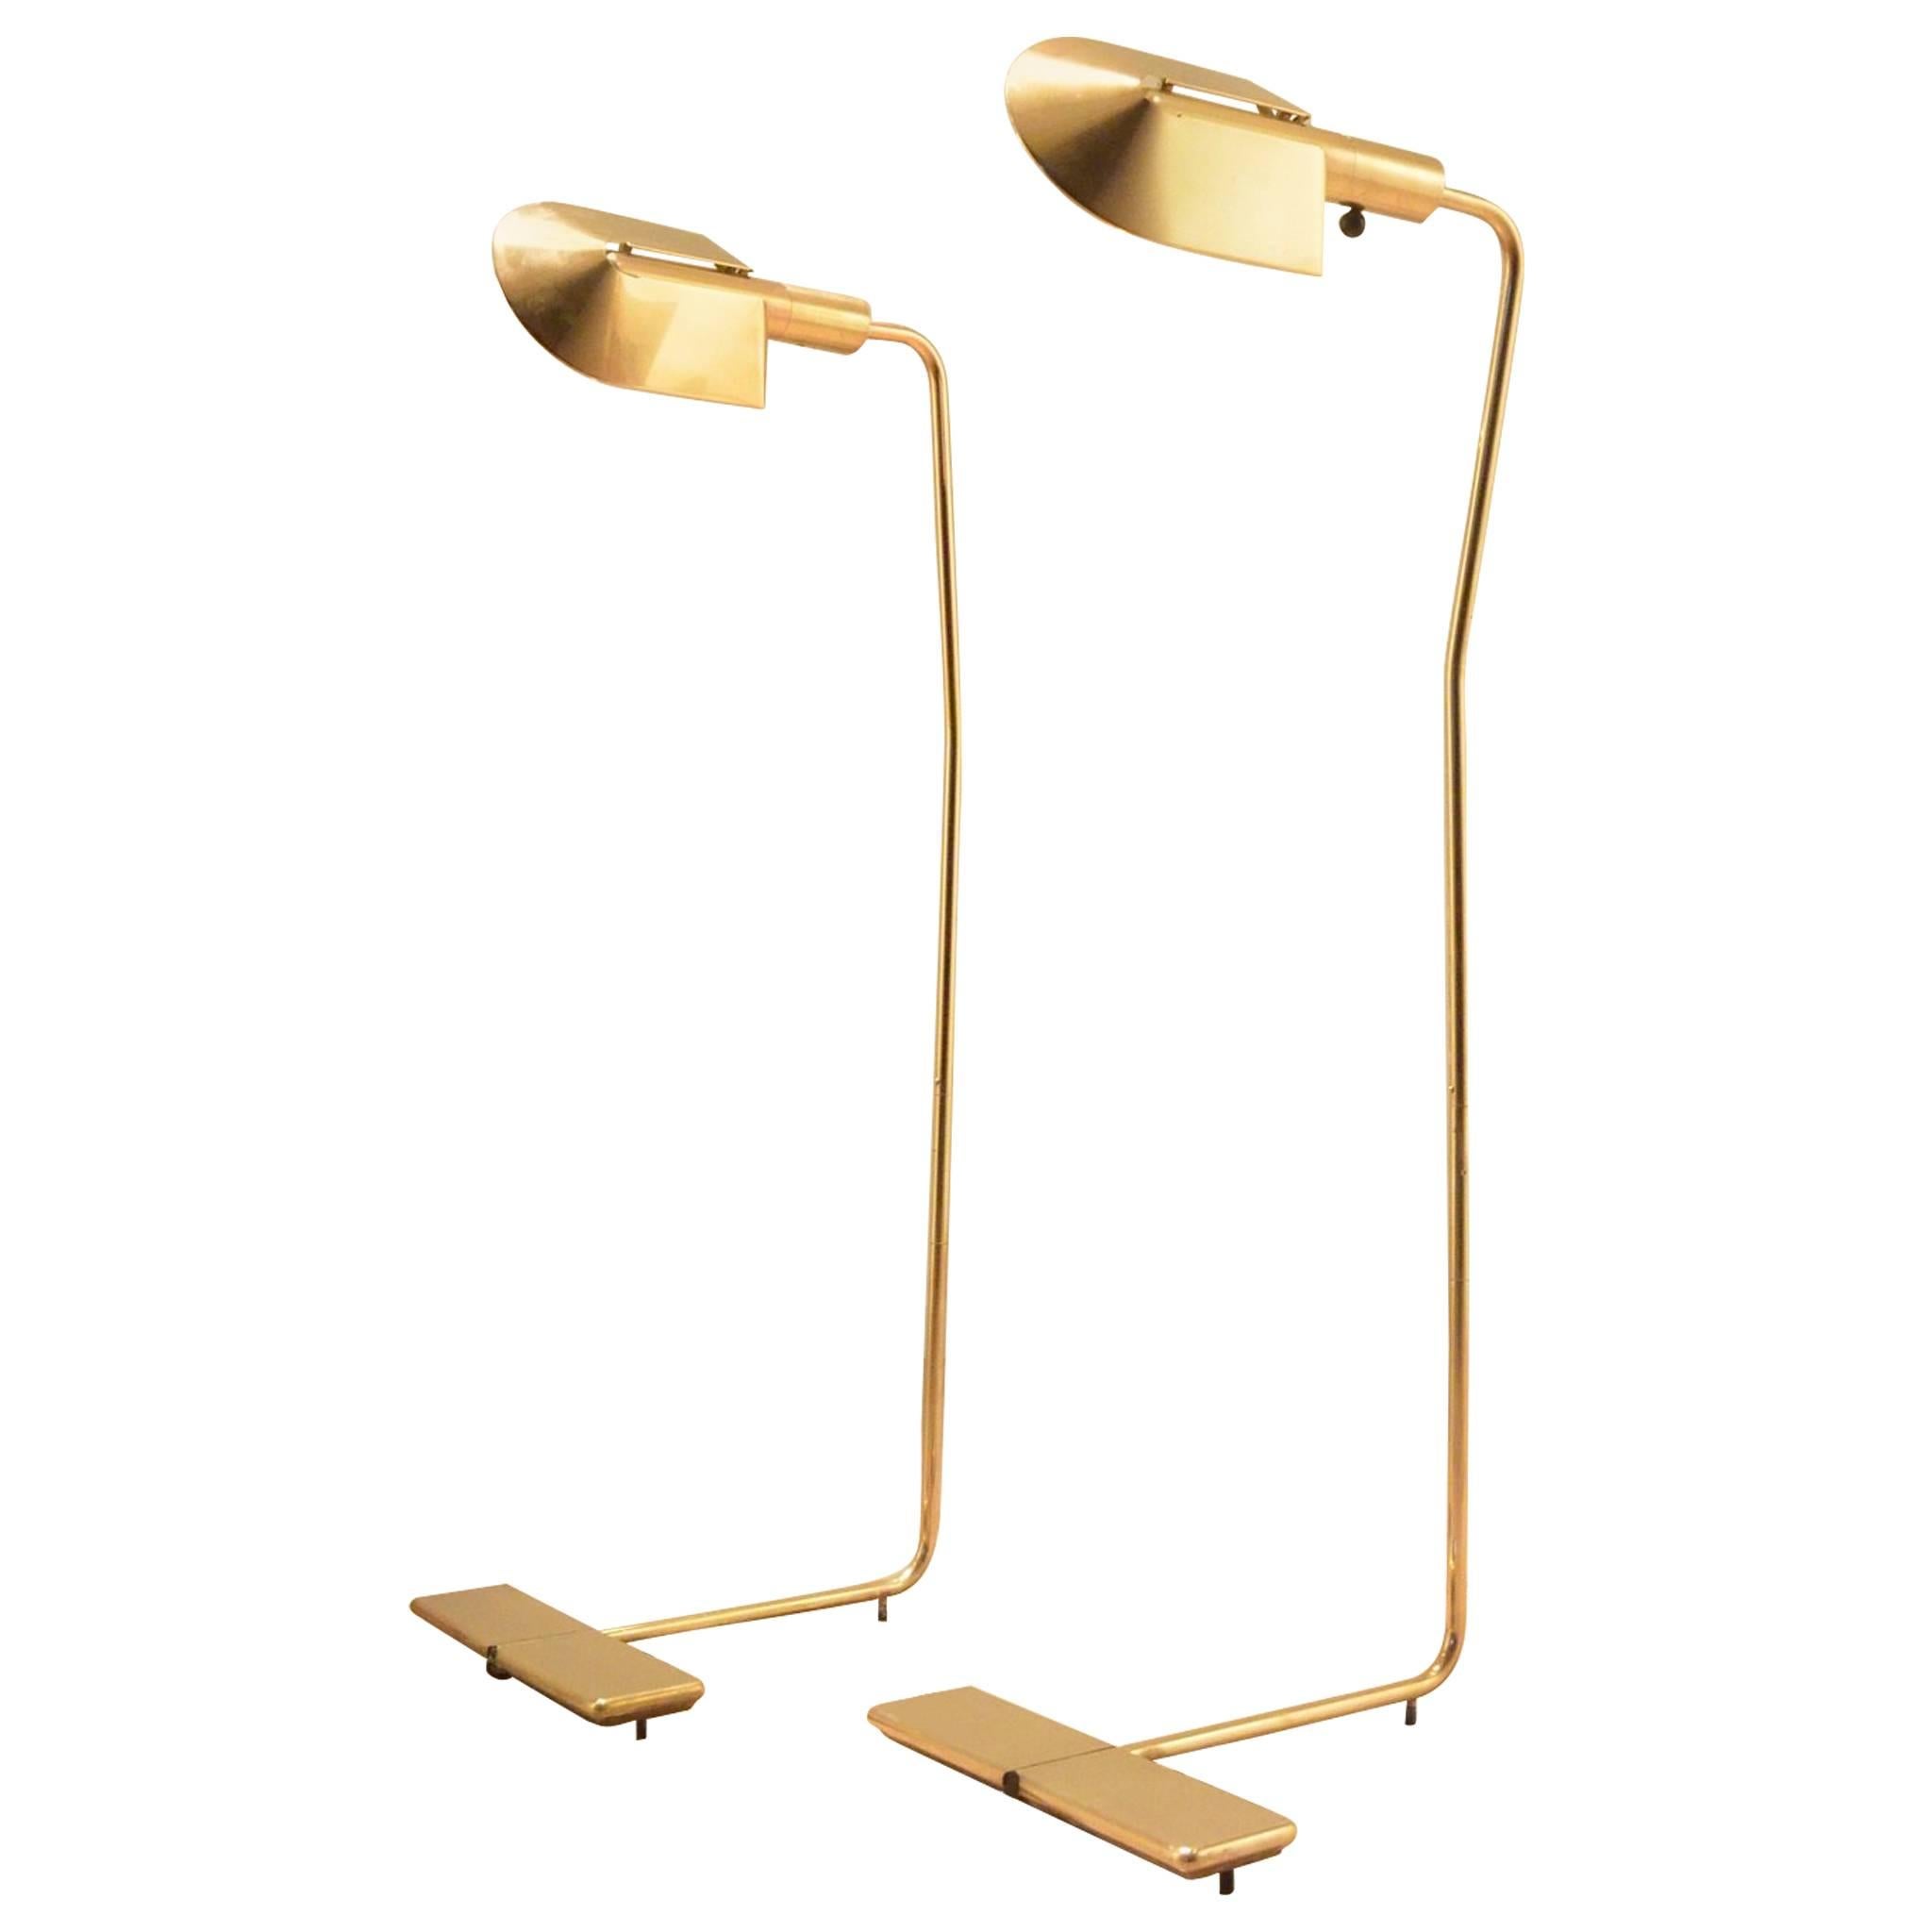 One Cedric Hartman 1970s Counterweighted Brass Reading Floor Lamp For Sale